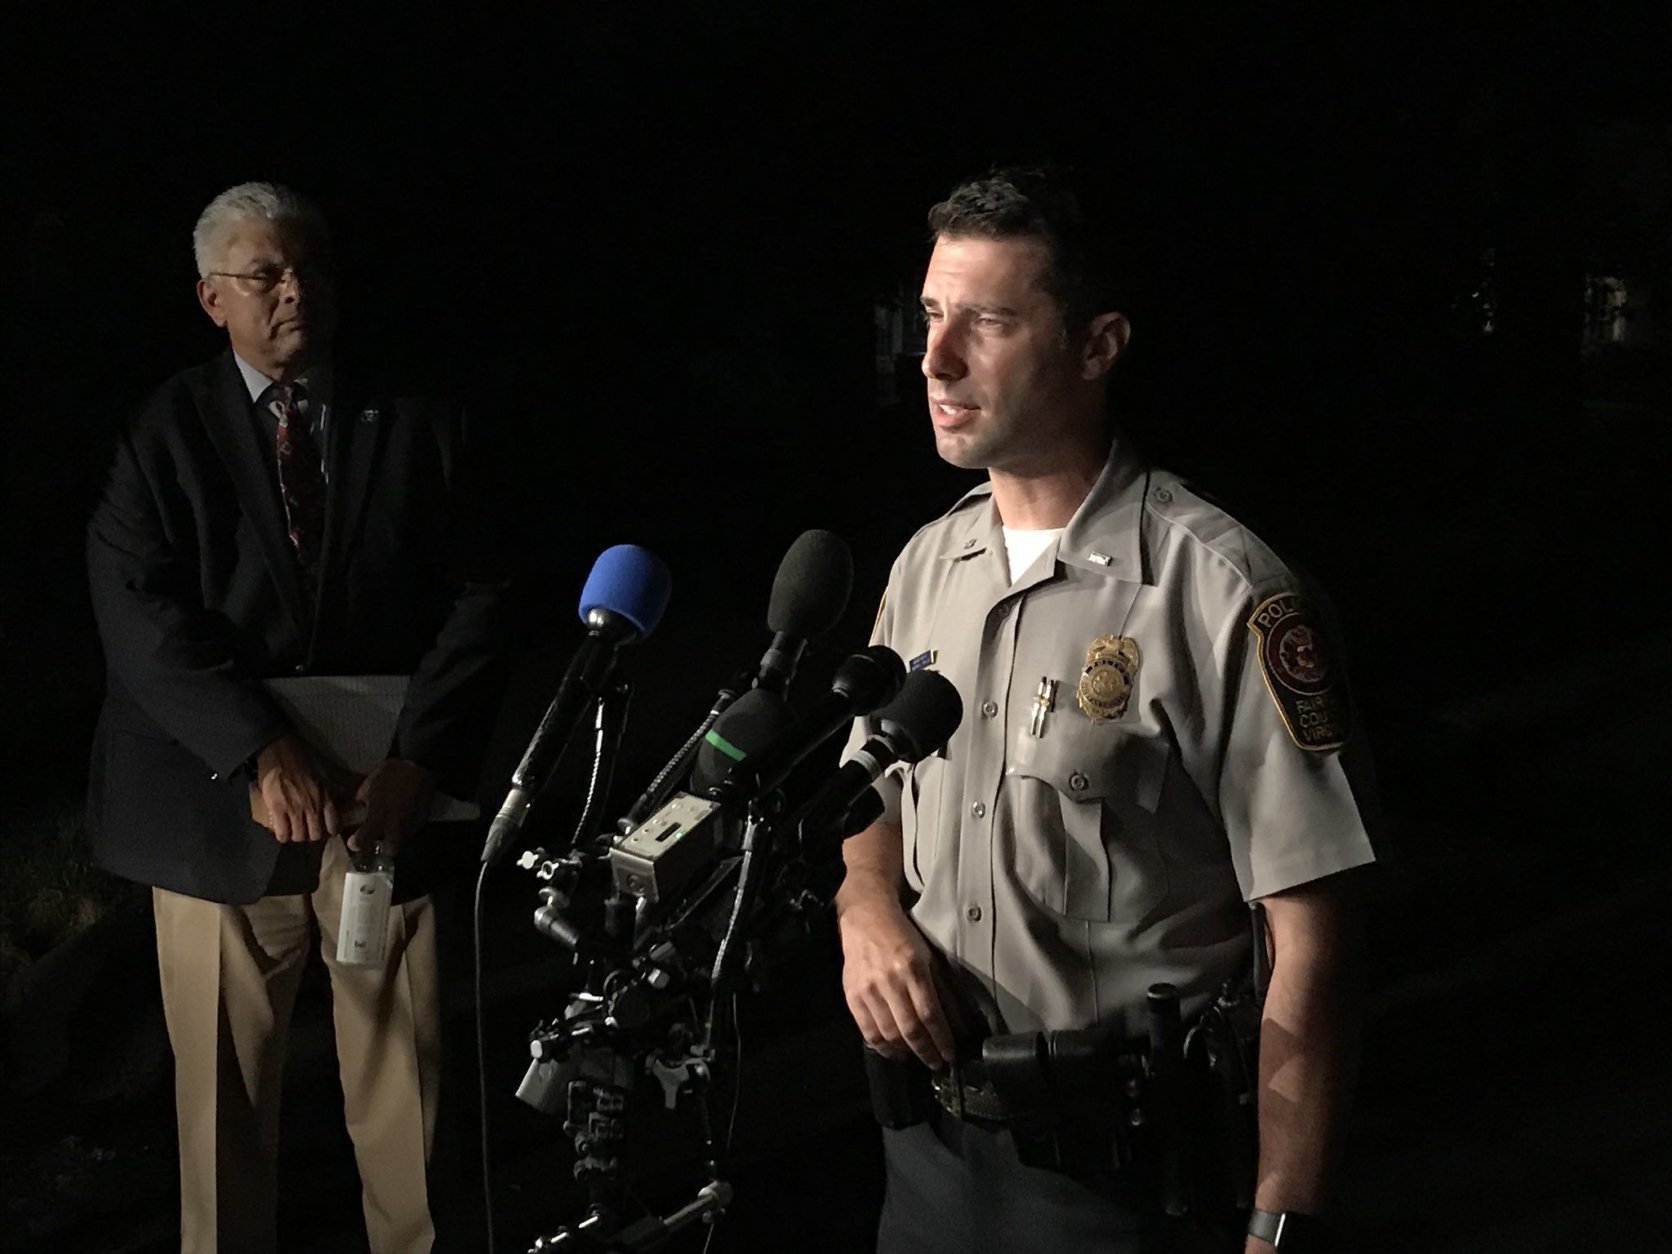 Lt. Eli Cory with Fairfax County police spoke with reporters on Wednesday, Sept. 5, 2018, near the scene where three people were found dead in Herndon, Virginia. (WTOP/Michelle Basch) 